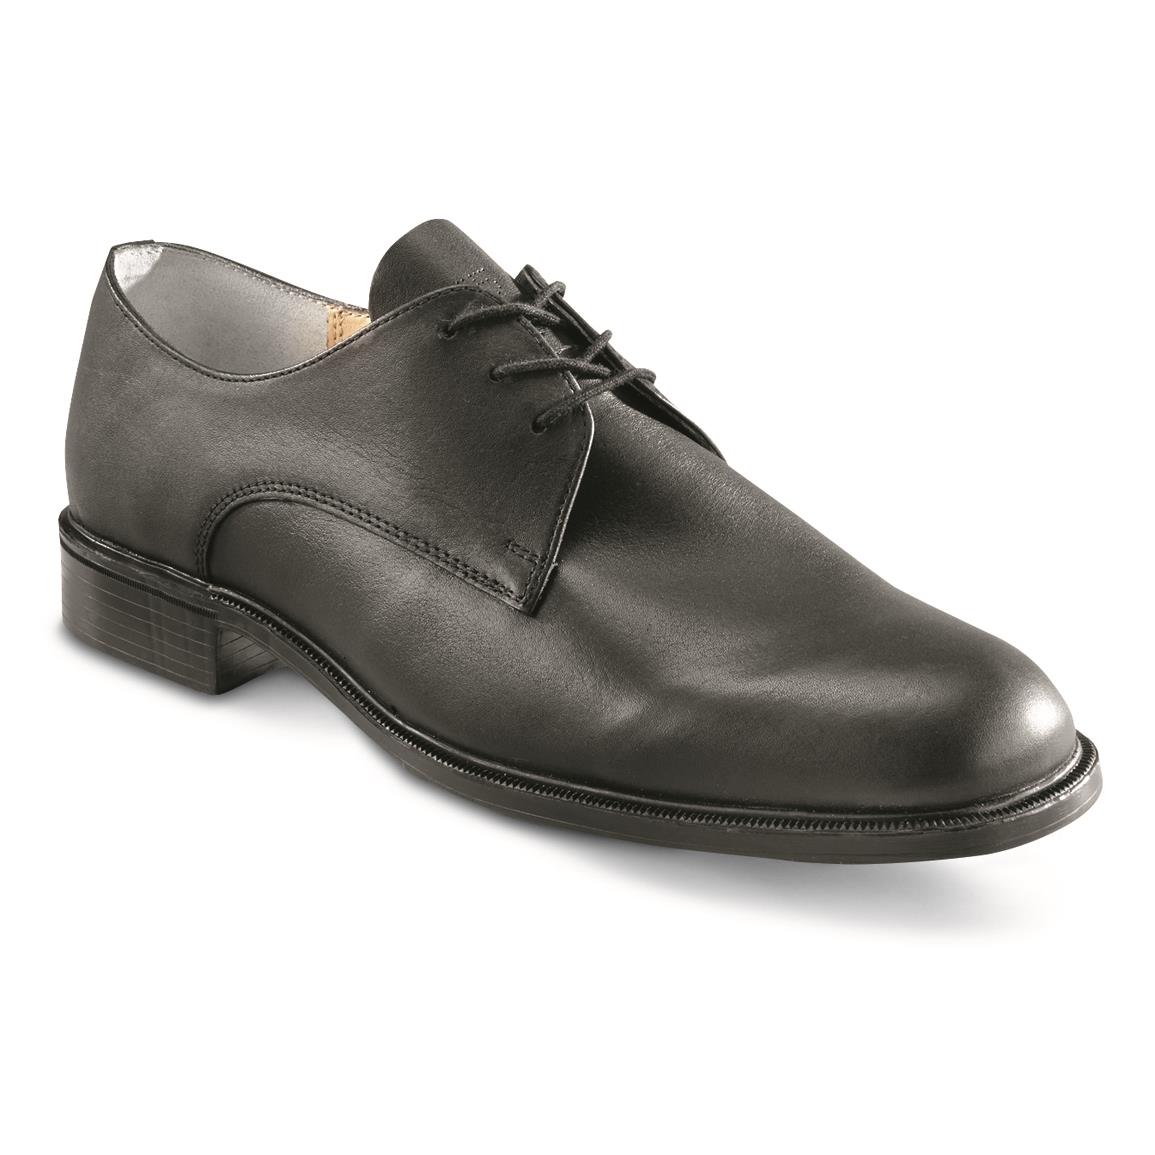 white military dress shoes